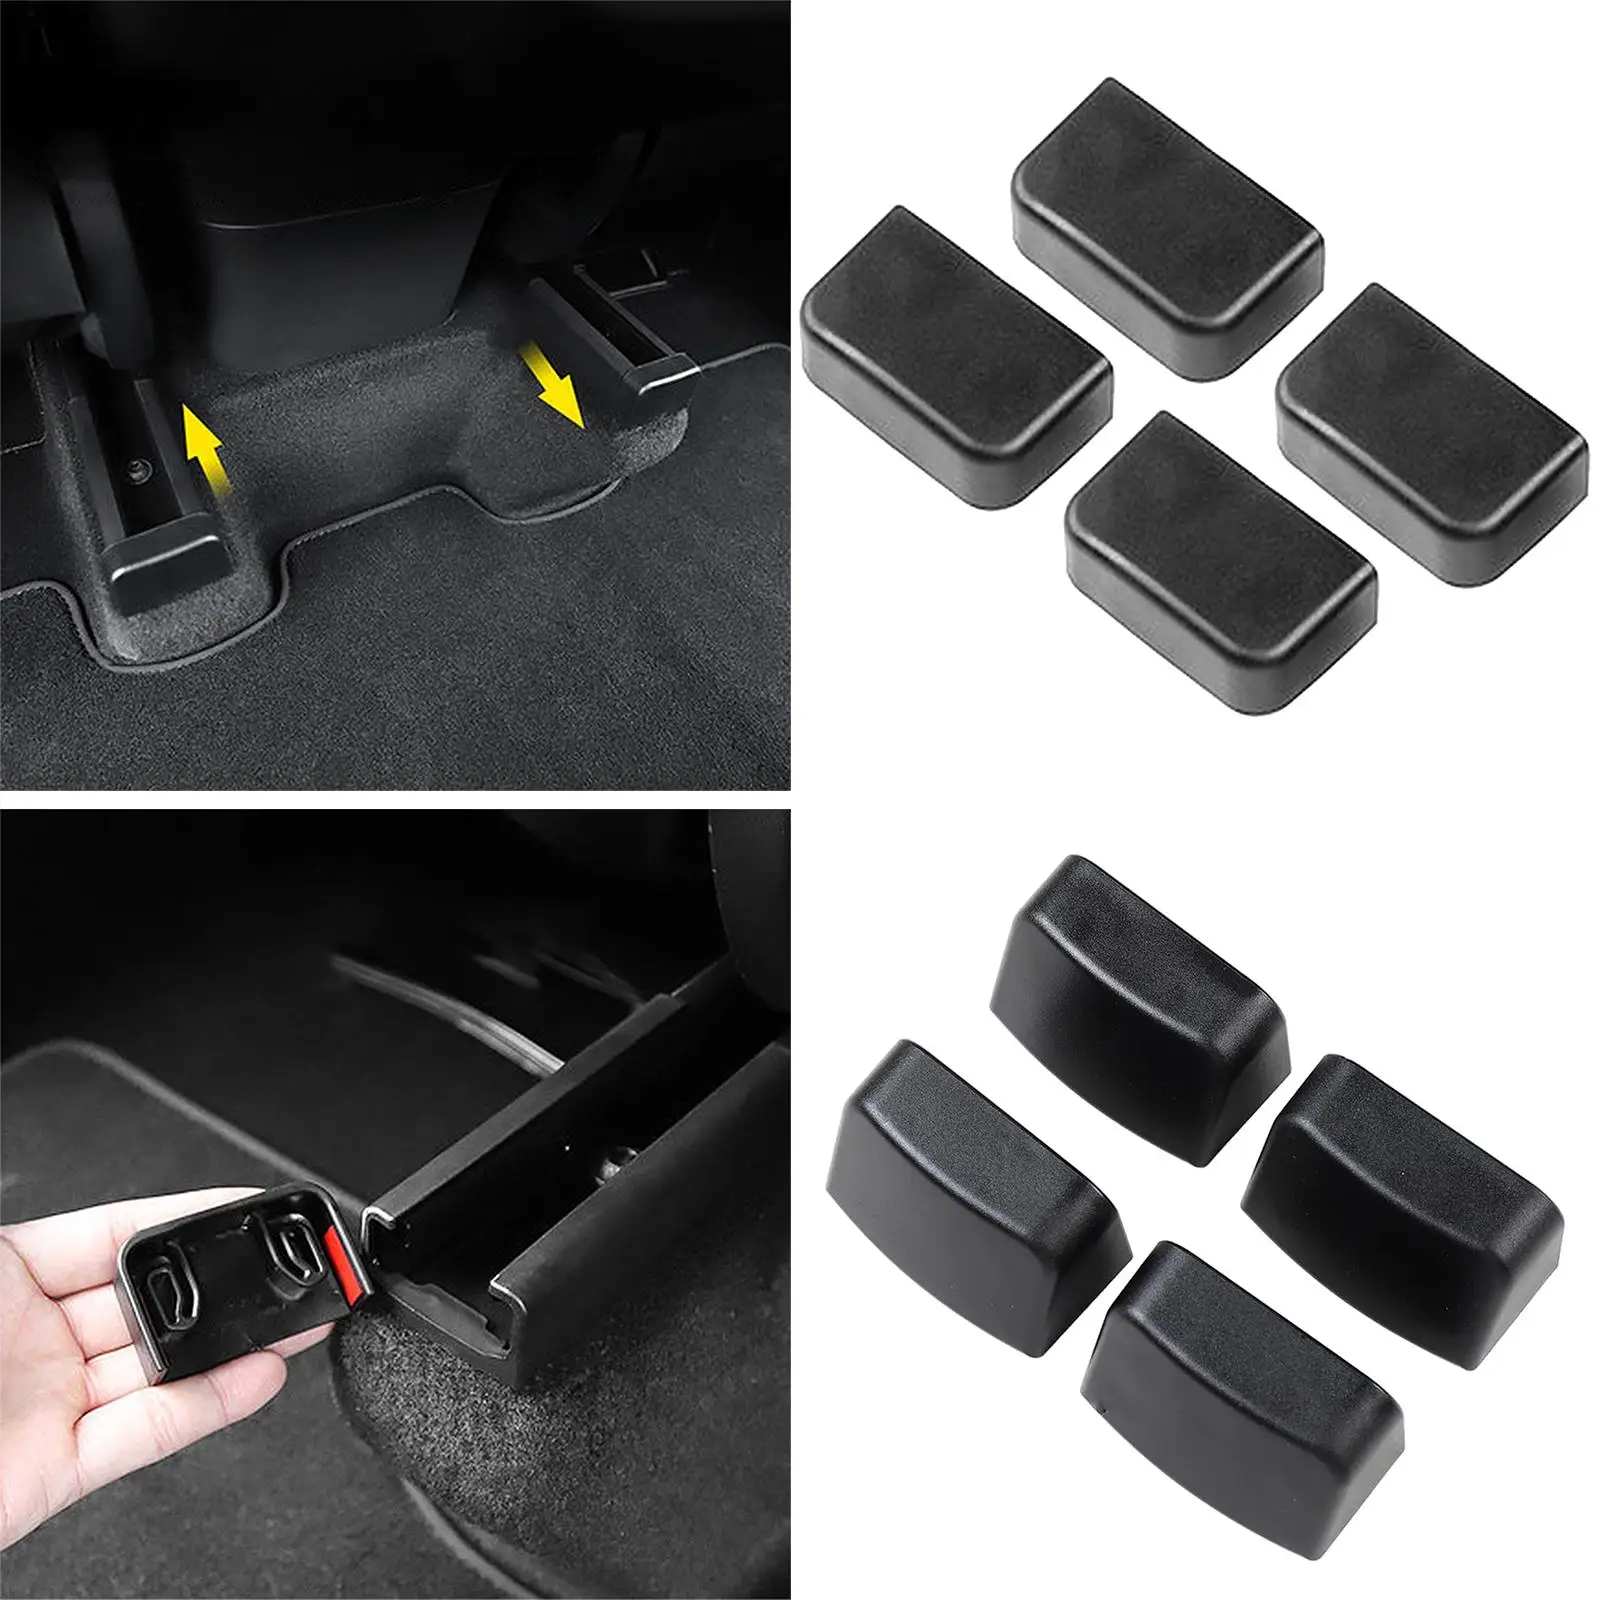 4x Slide Rail Plugs Auto Functional Accs ABS Car Interior Rear Seat Soft Rubber Plugs Protection Fits for Tesla Model 3 Model Y